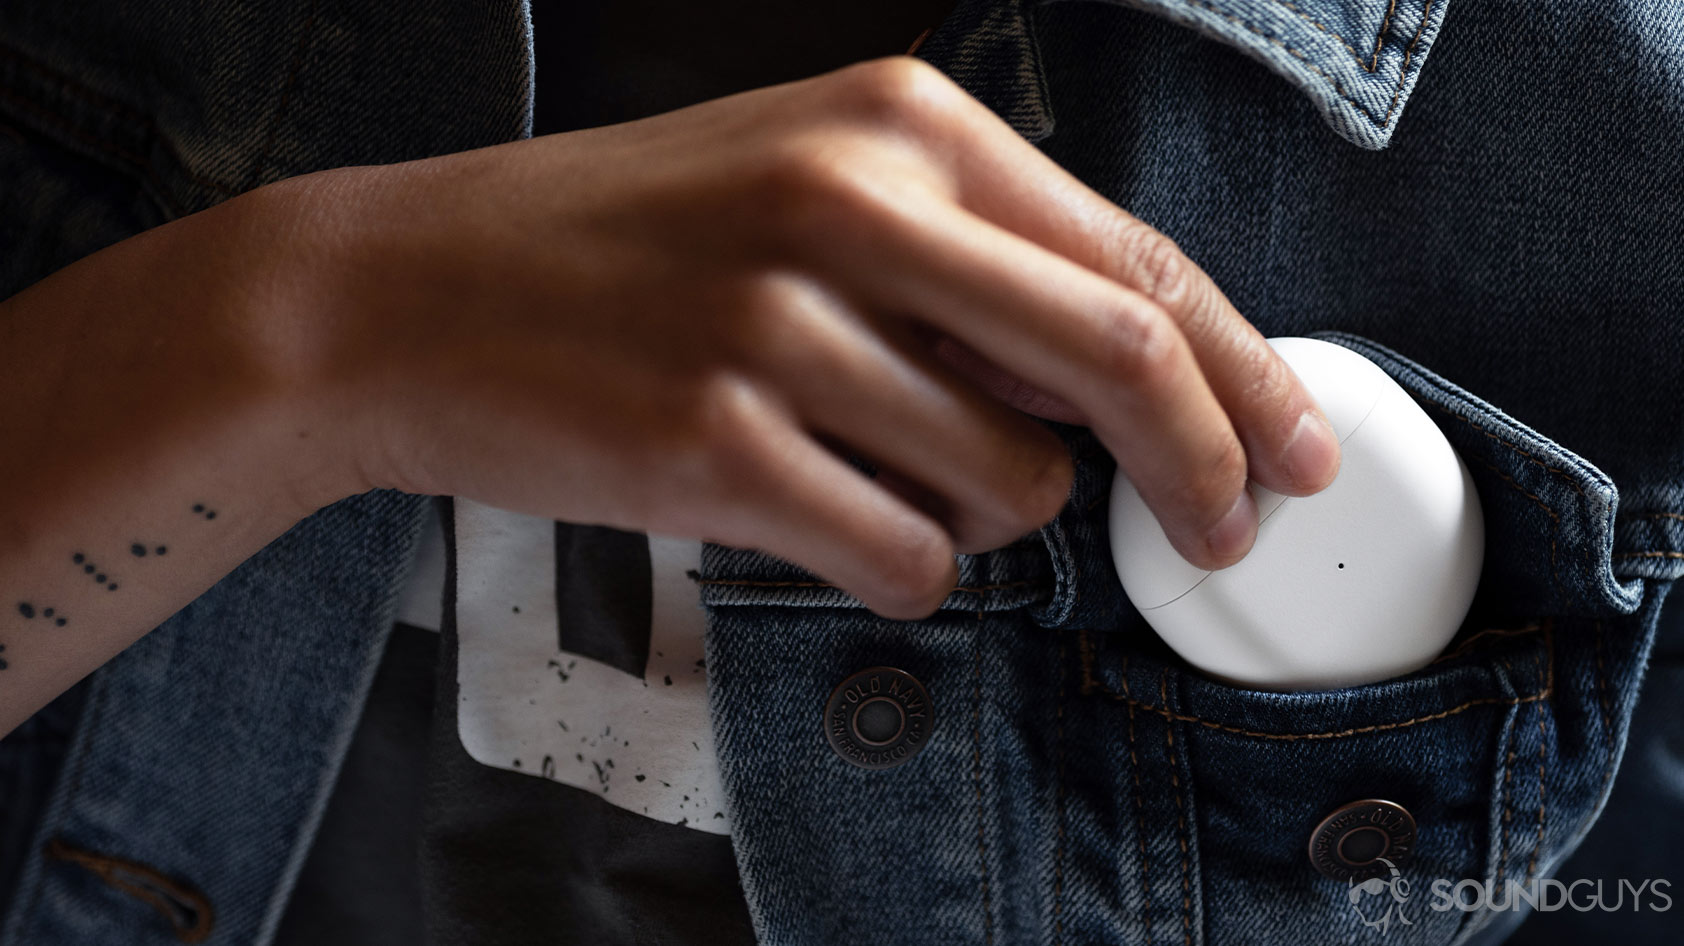 A picture of the OnePlus Buds true wireless earbuds case being inserted into the breast pocket of a denim jacket.